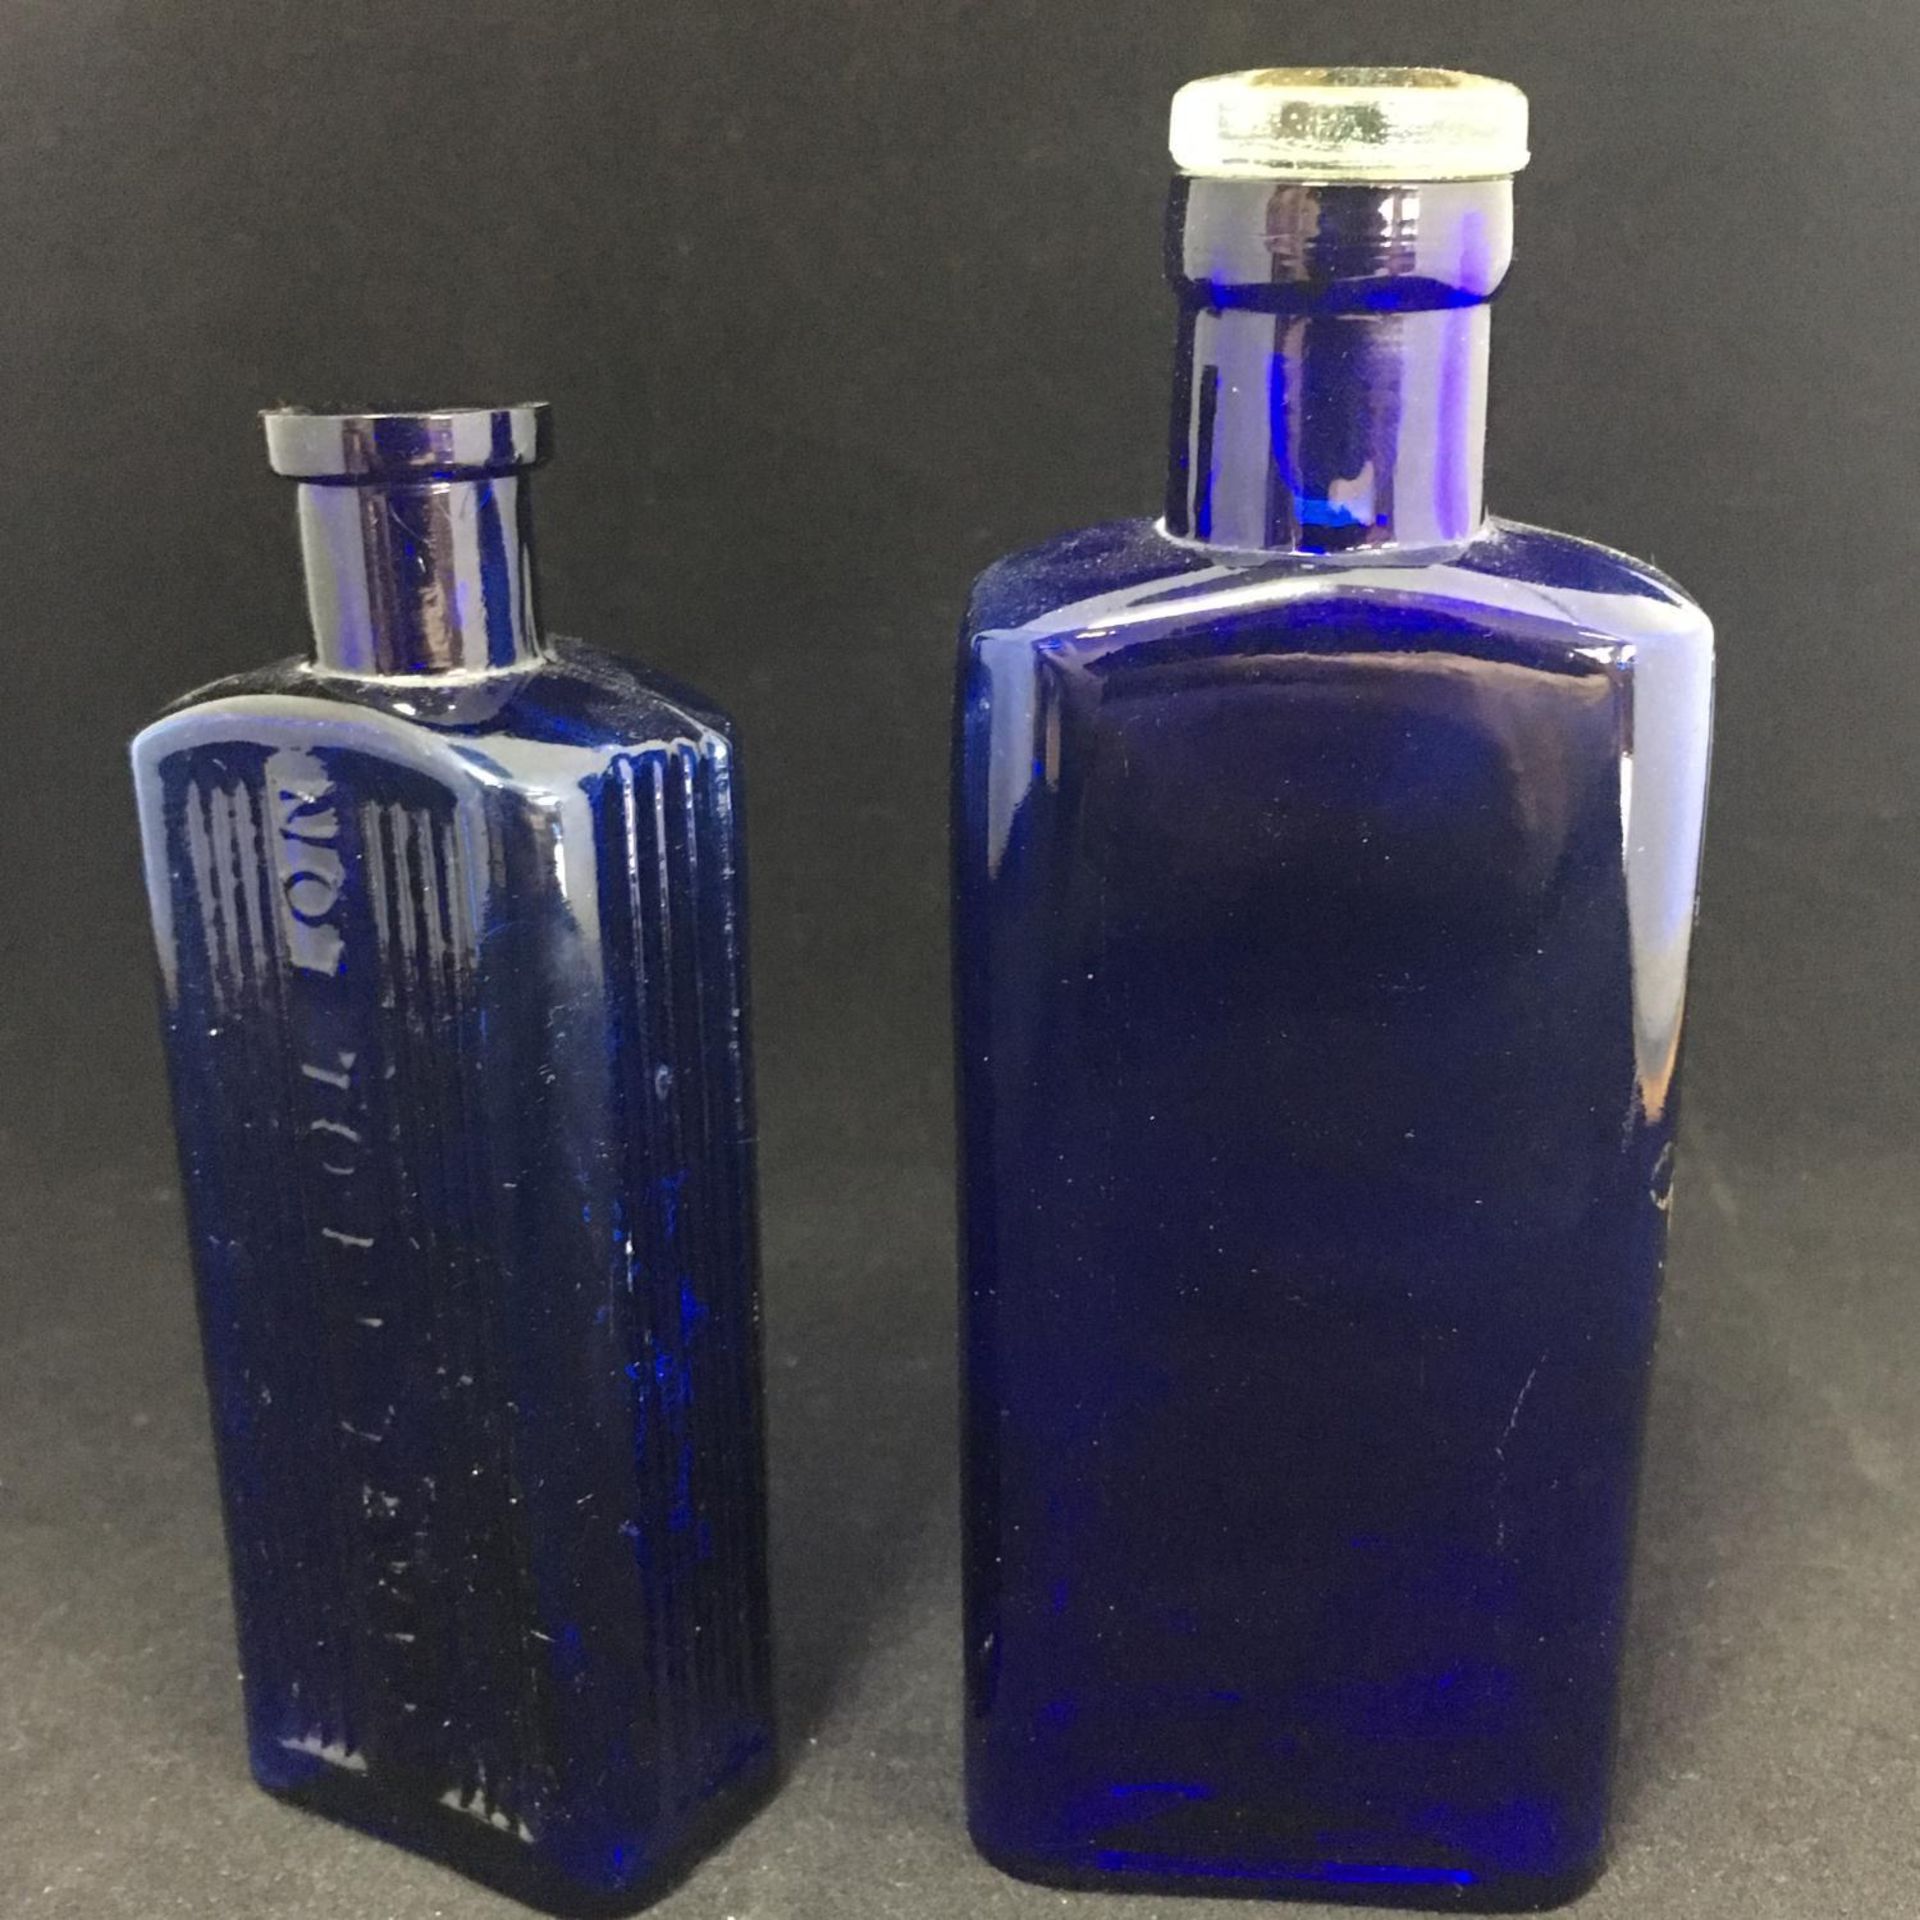 PAIR OF BLUE GLASS CHEMIST'S BOTTLES. One complete with original glass stopper. The hammer price